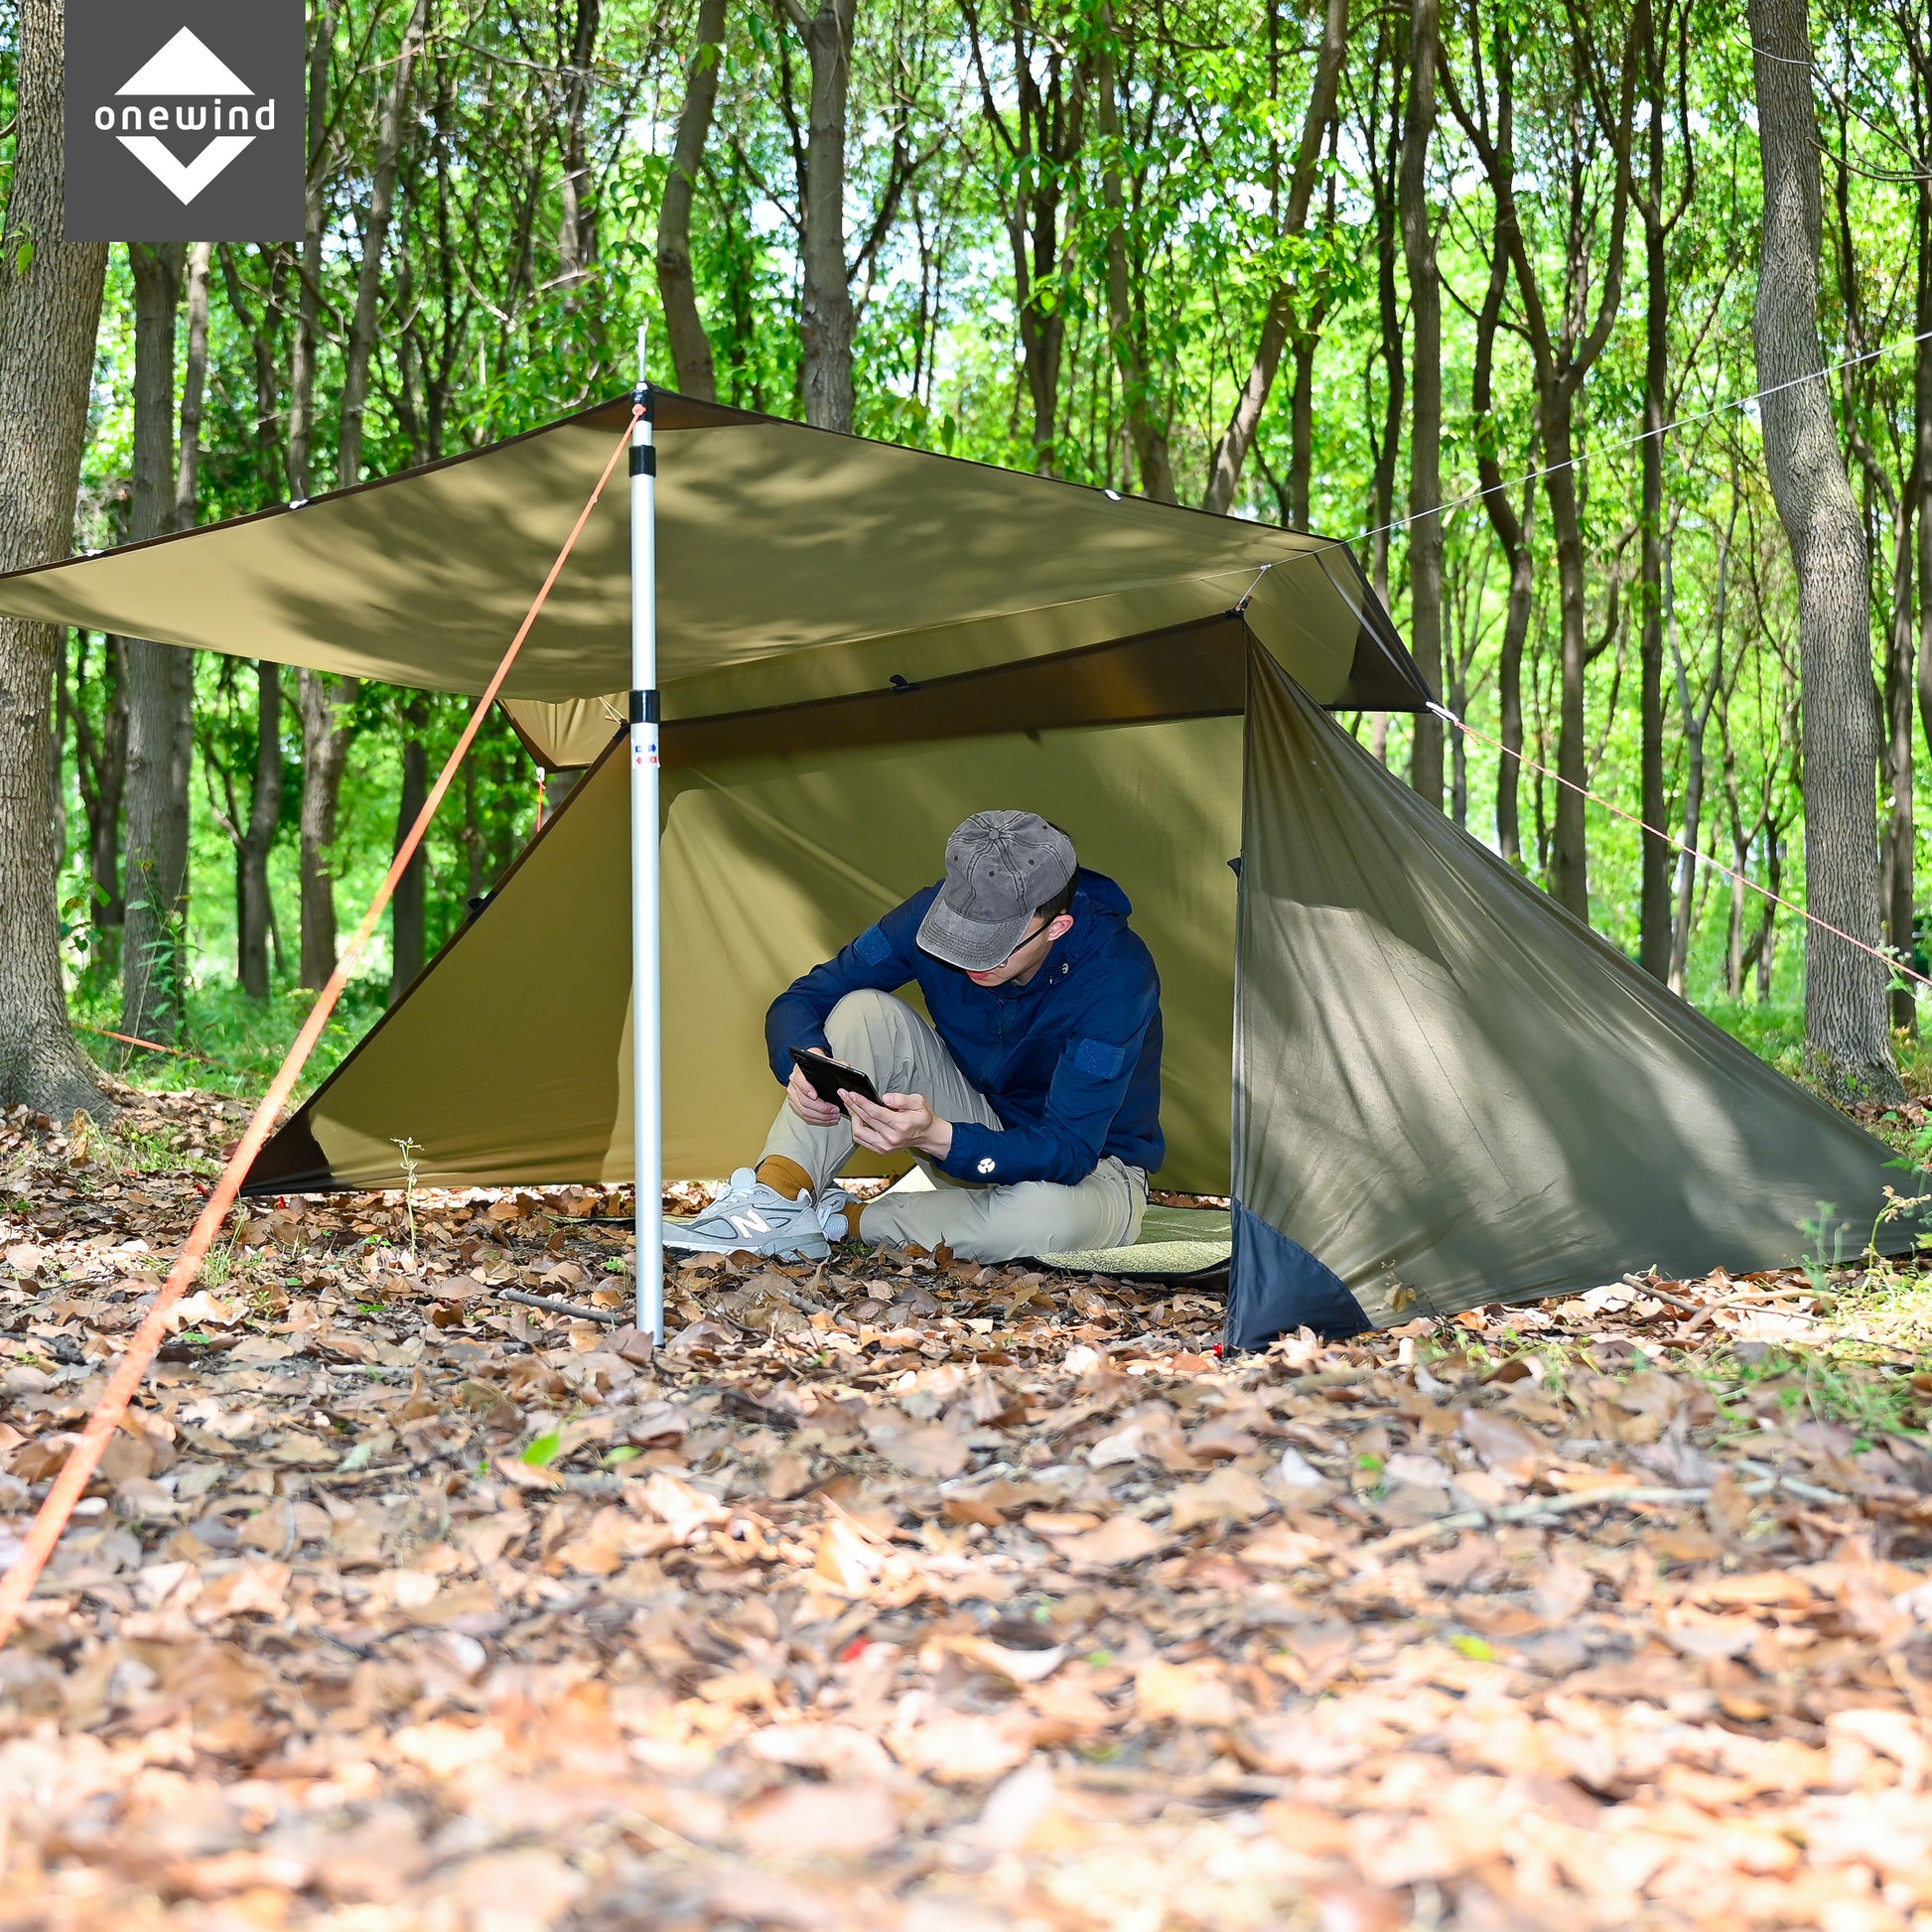 OD Shelter | Onewind Outdoors